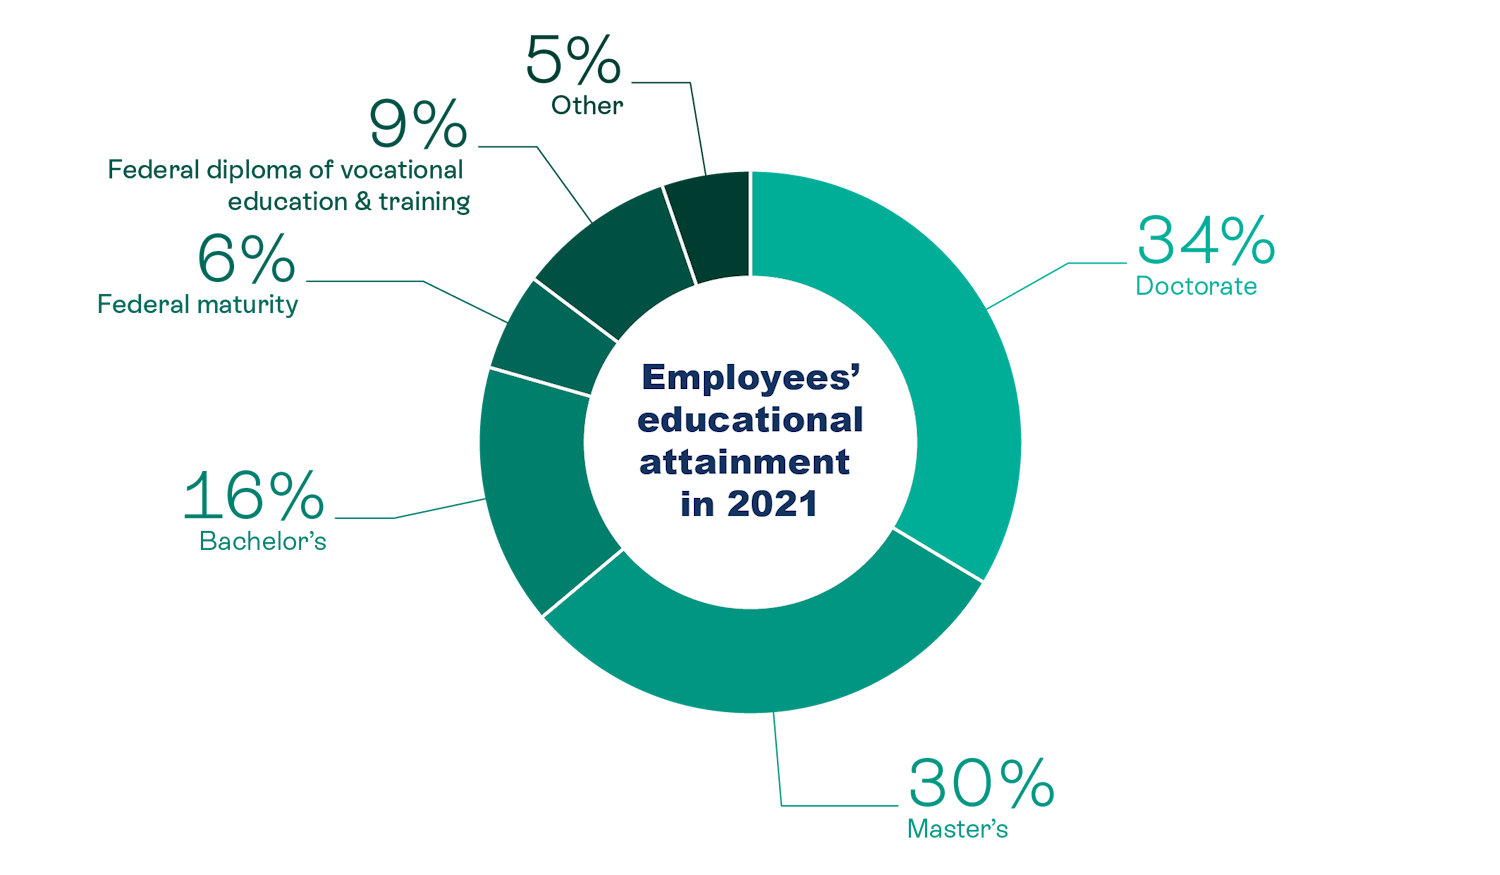 Employees' educational attainment in 2021